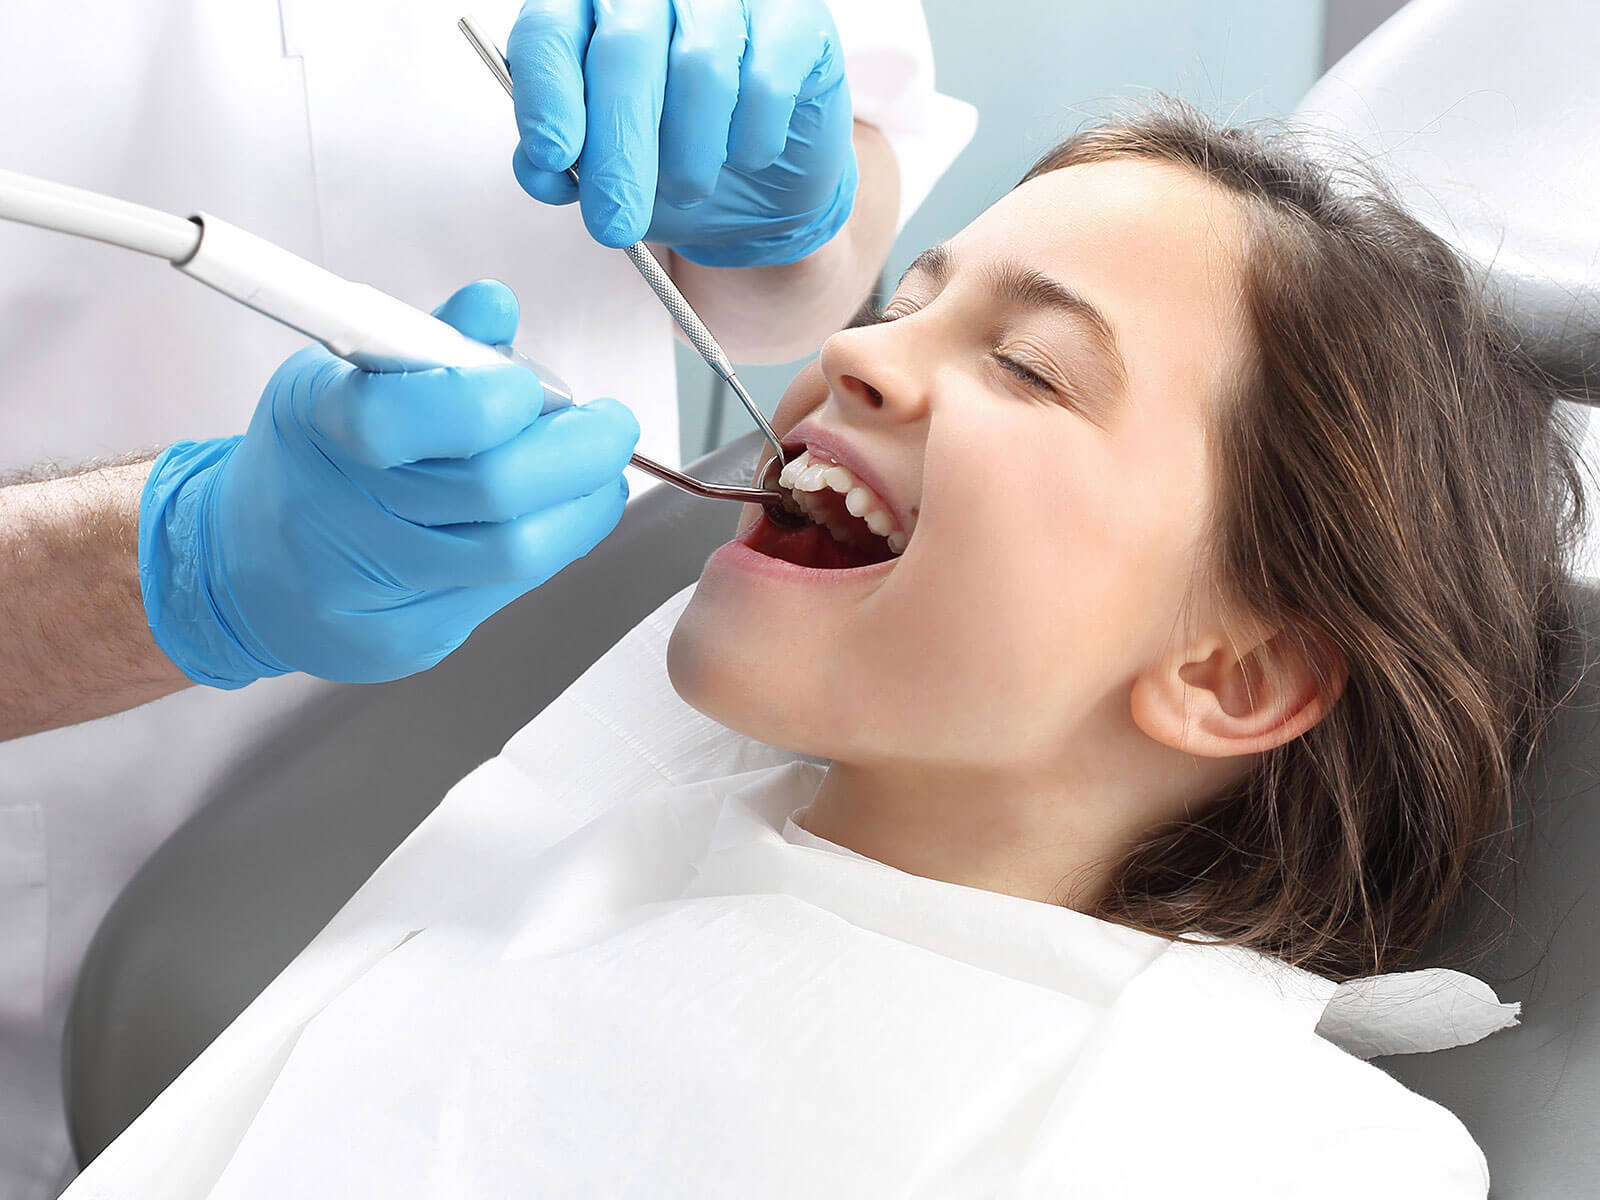 Dealing With Common Dental Issues In Children